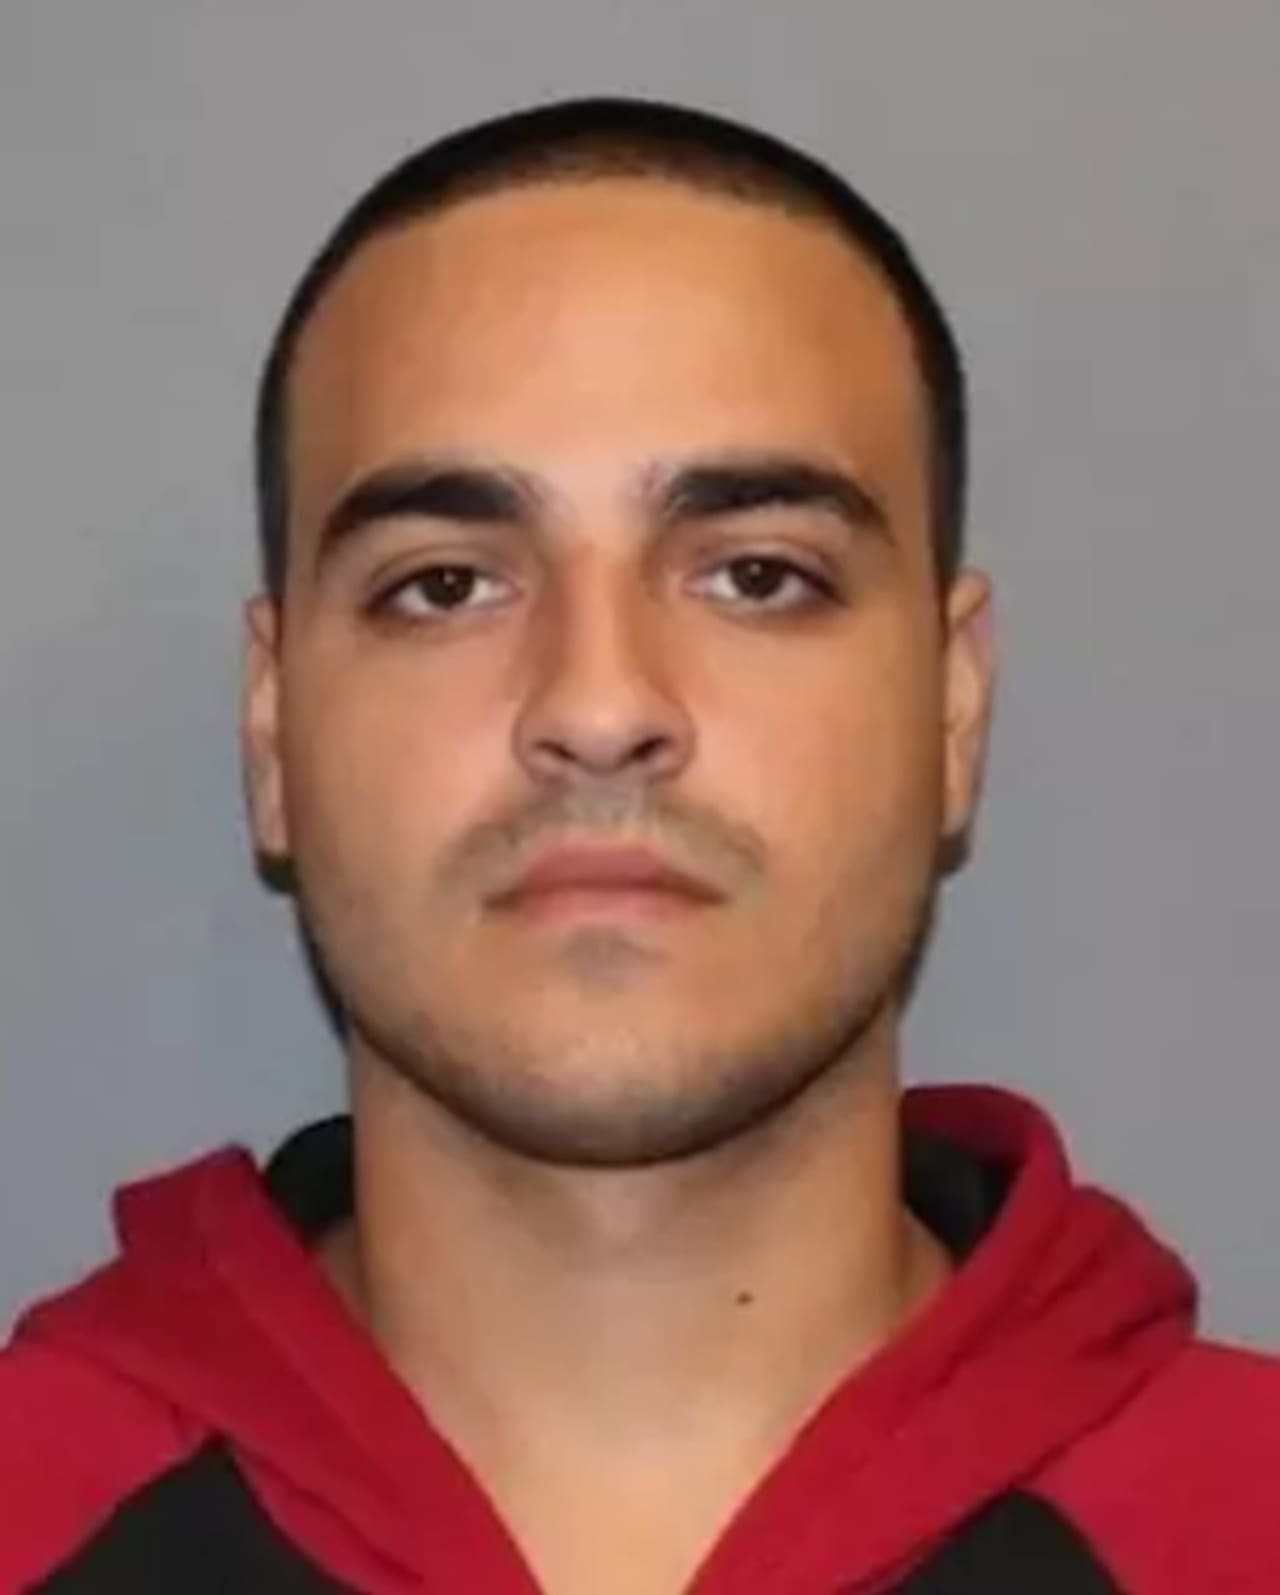 Jorge Chiclana, 22, will serve a year in prison in connection with the death of his 5-month-old son.